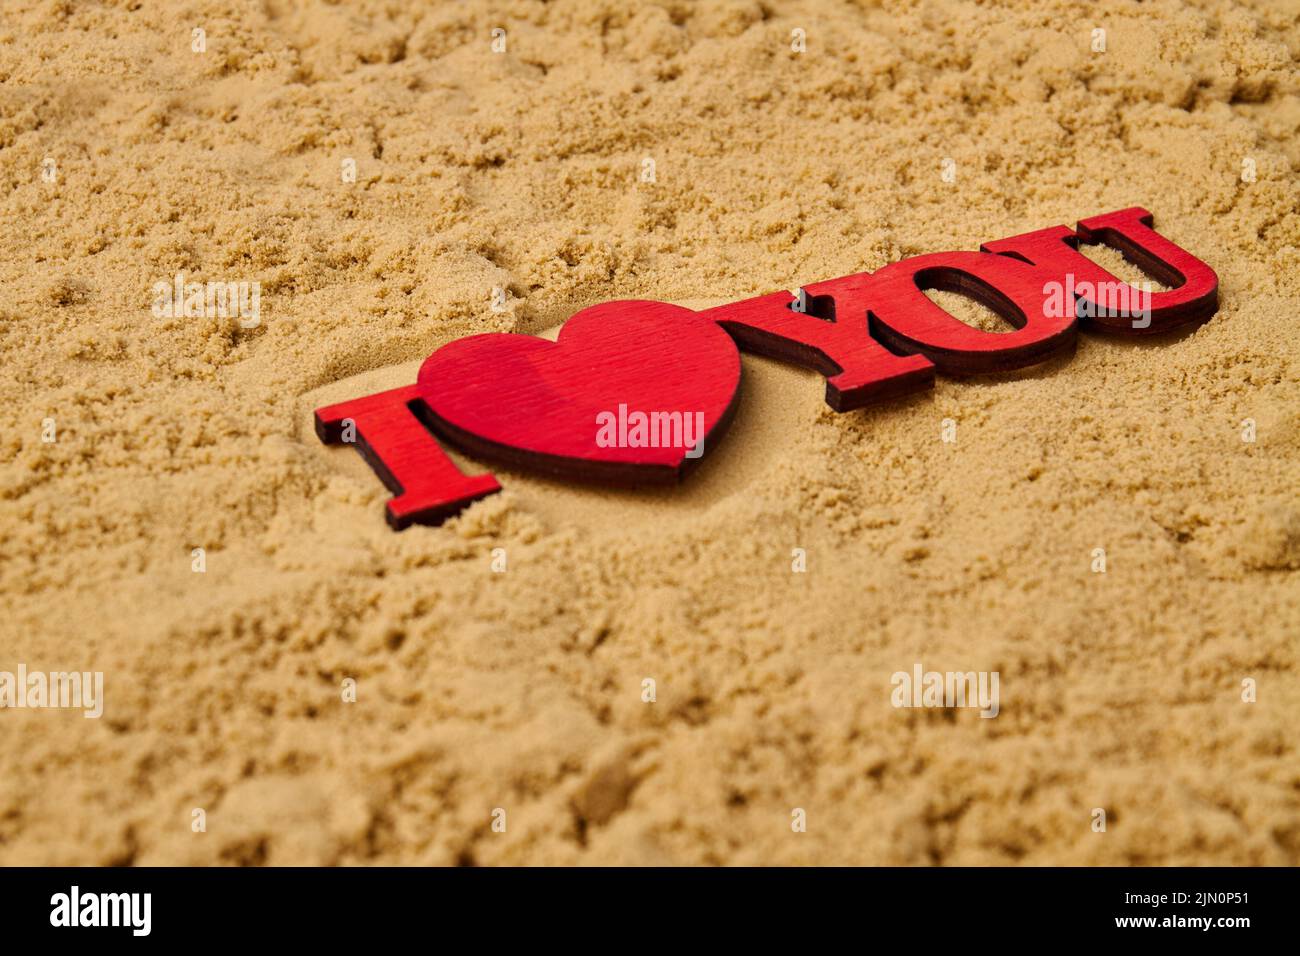 Close up red wooden I love you cutout on the sand. Honeymoon vacation concept. Stock Photo